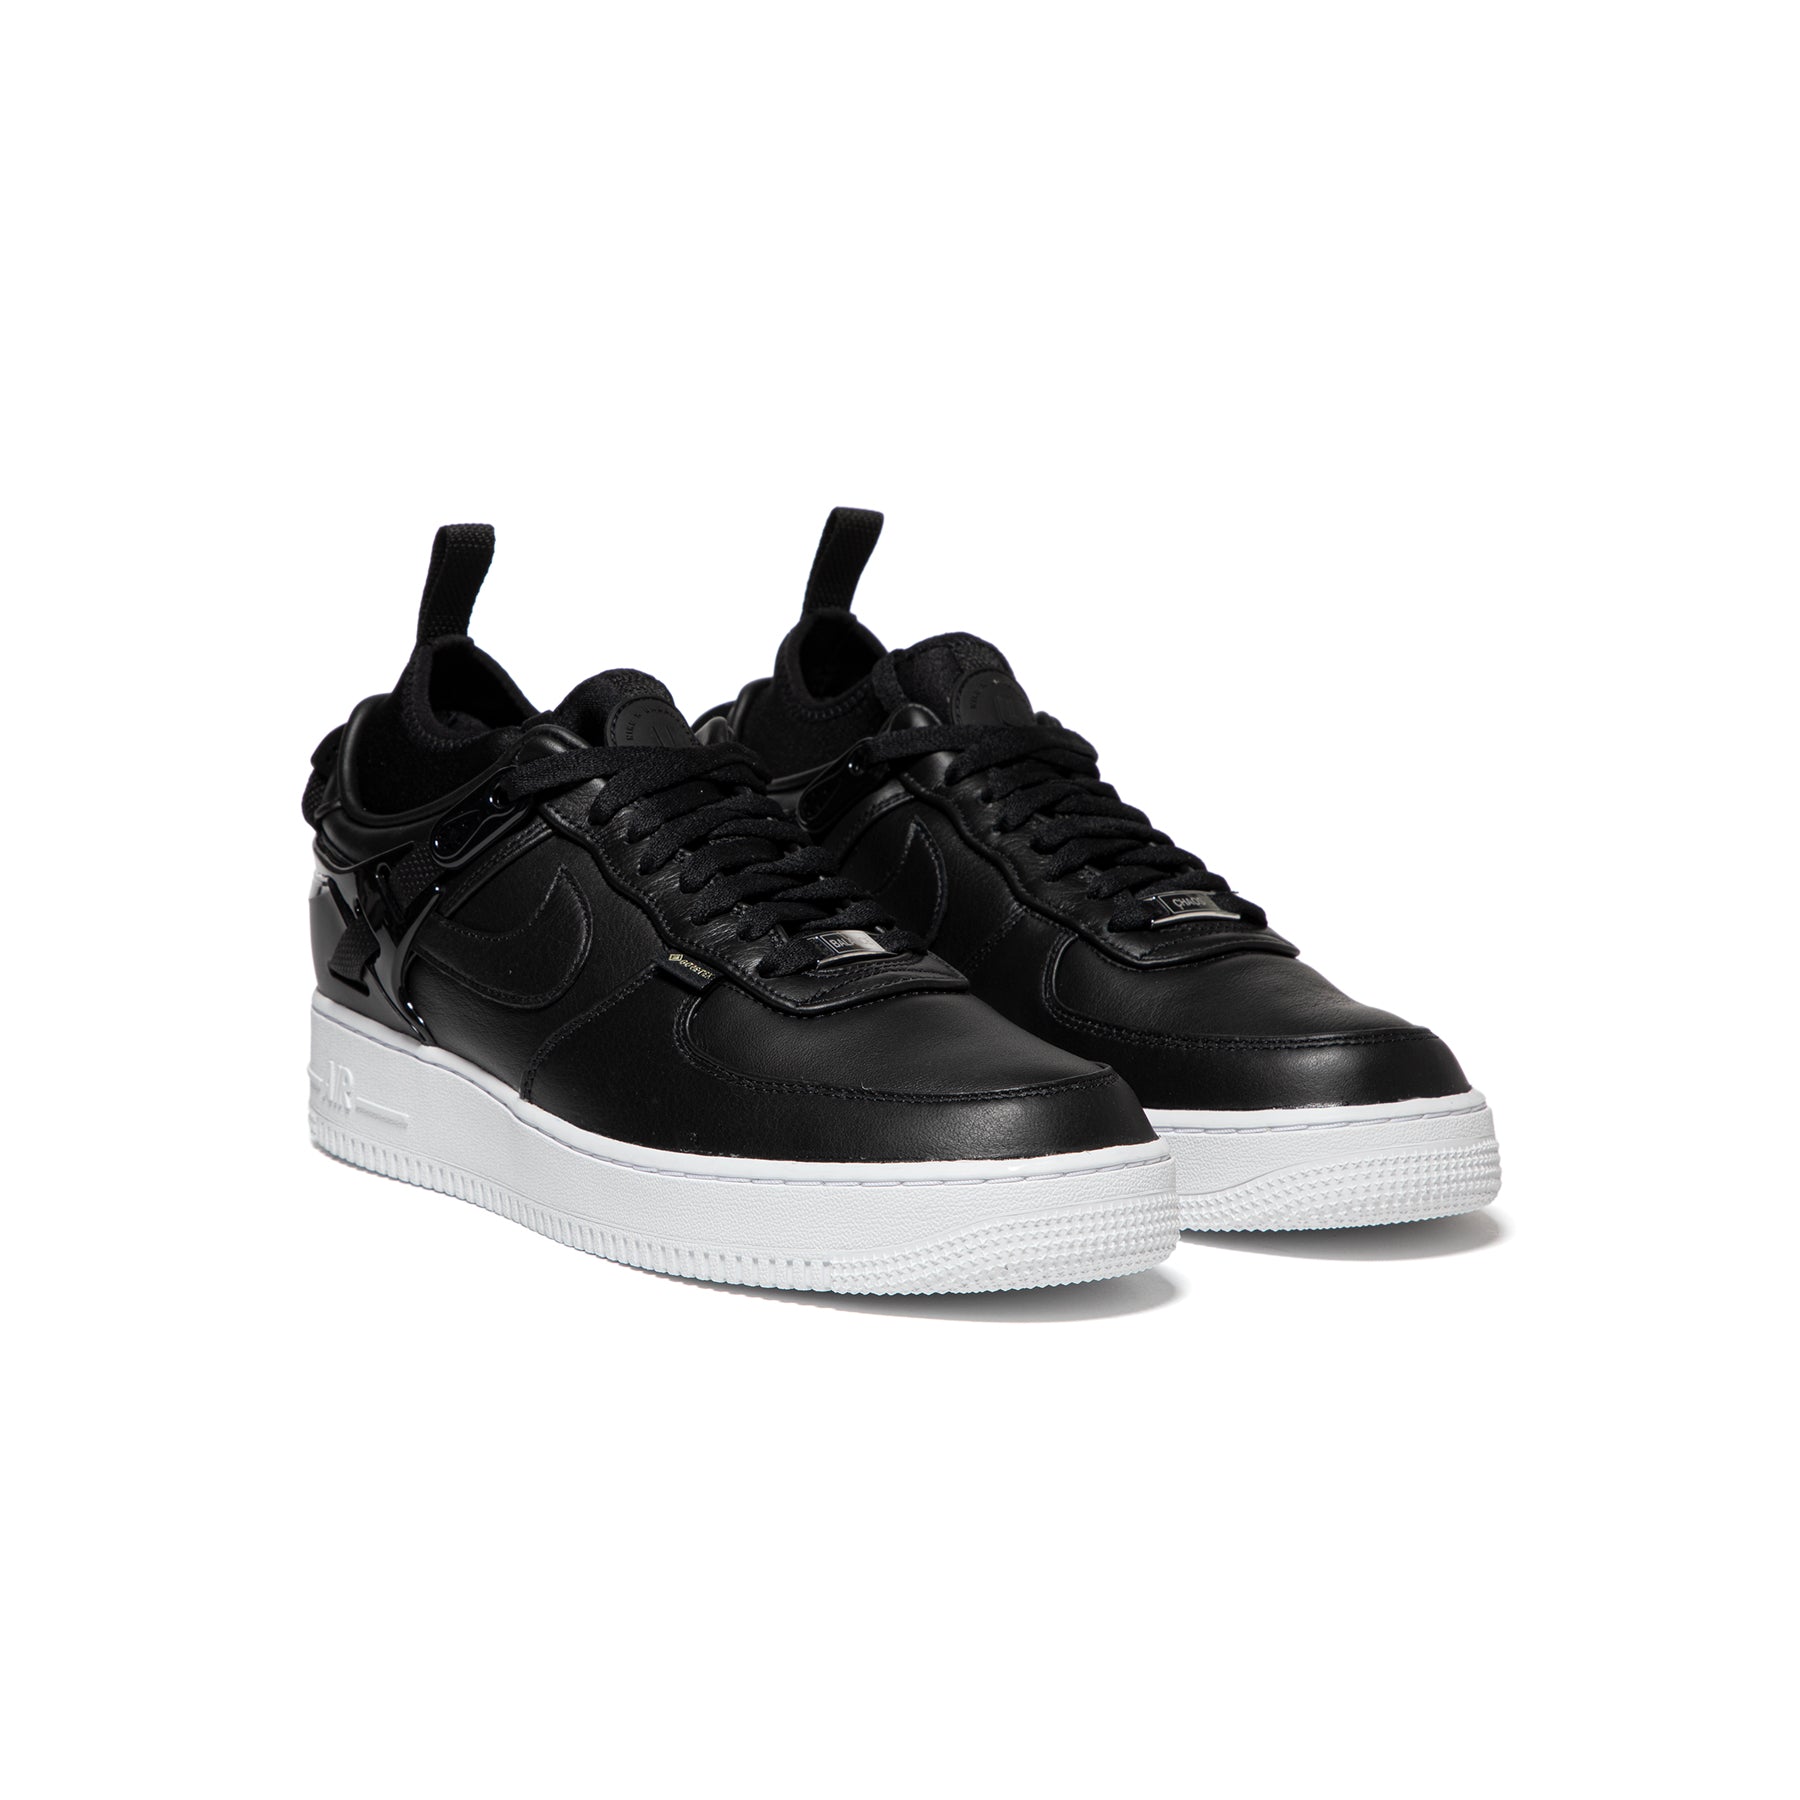 Nike x Undercover Air Force 1 Low SP - Black / White 5